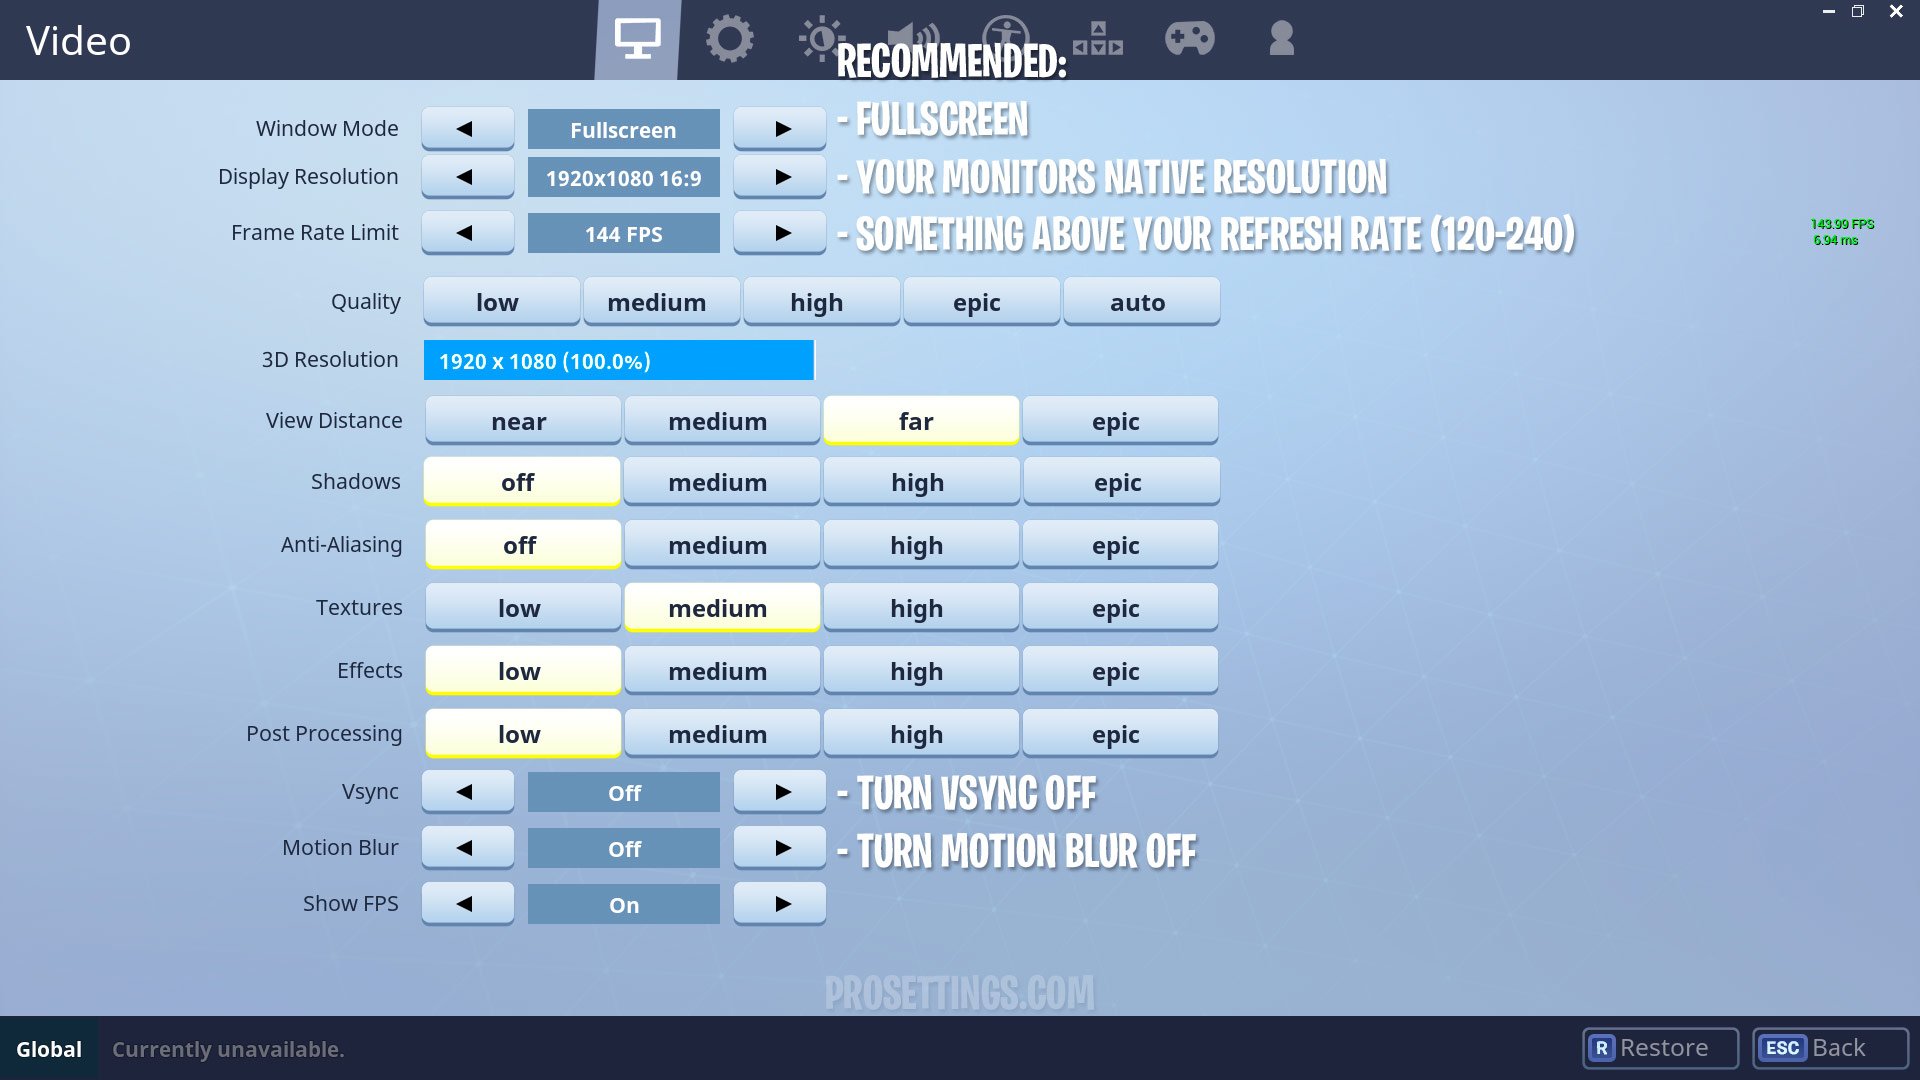 Best Fortnite Settings For Performance Fps Boost Competitive Play - recommended fortnite video settings